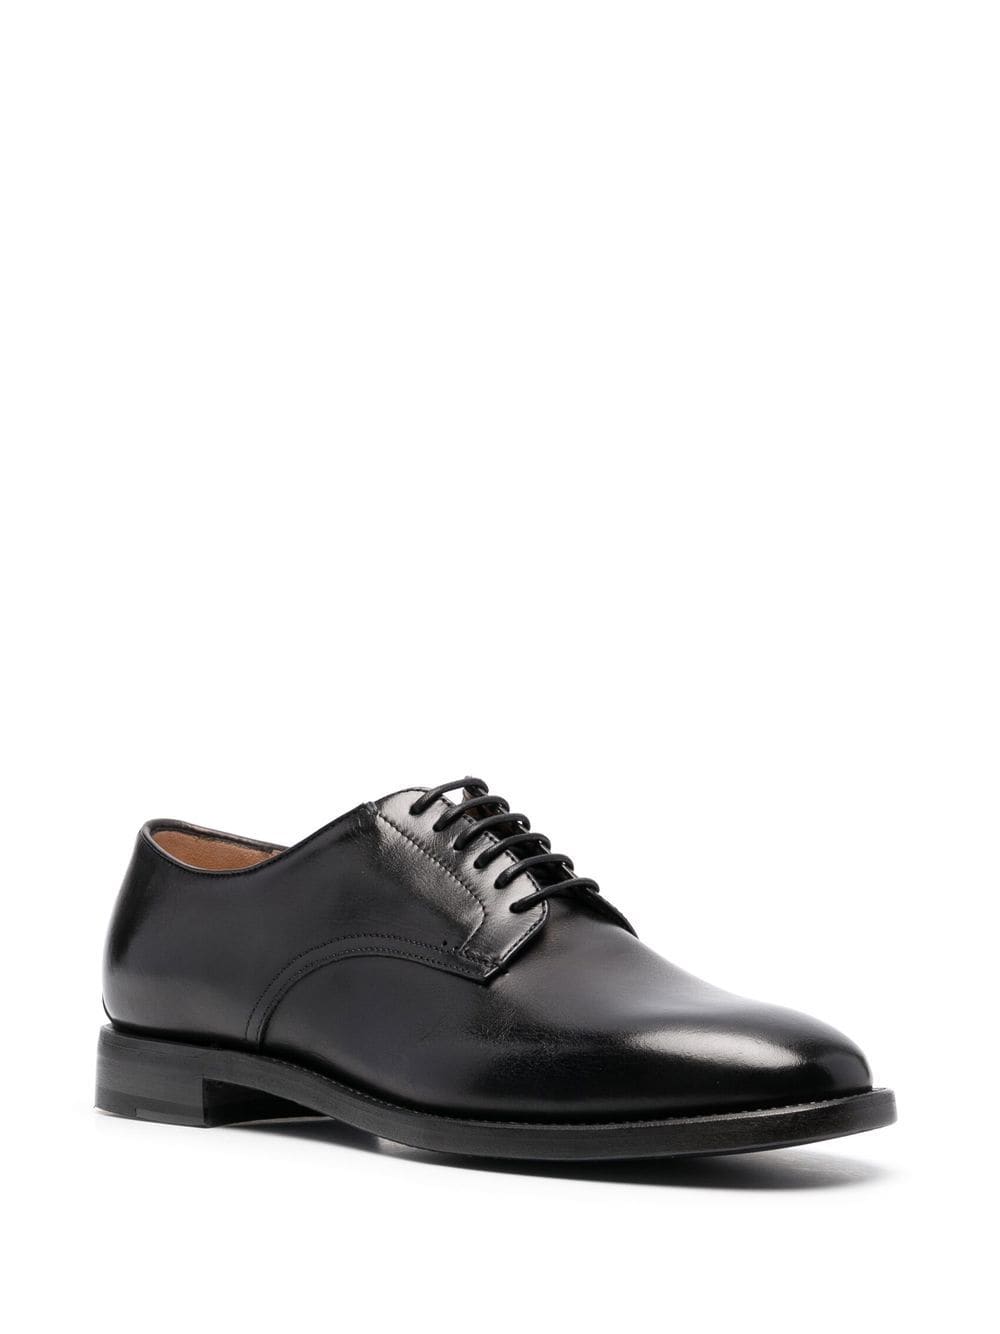 LACE-UP LEATHER OXFORD SHOES